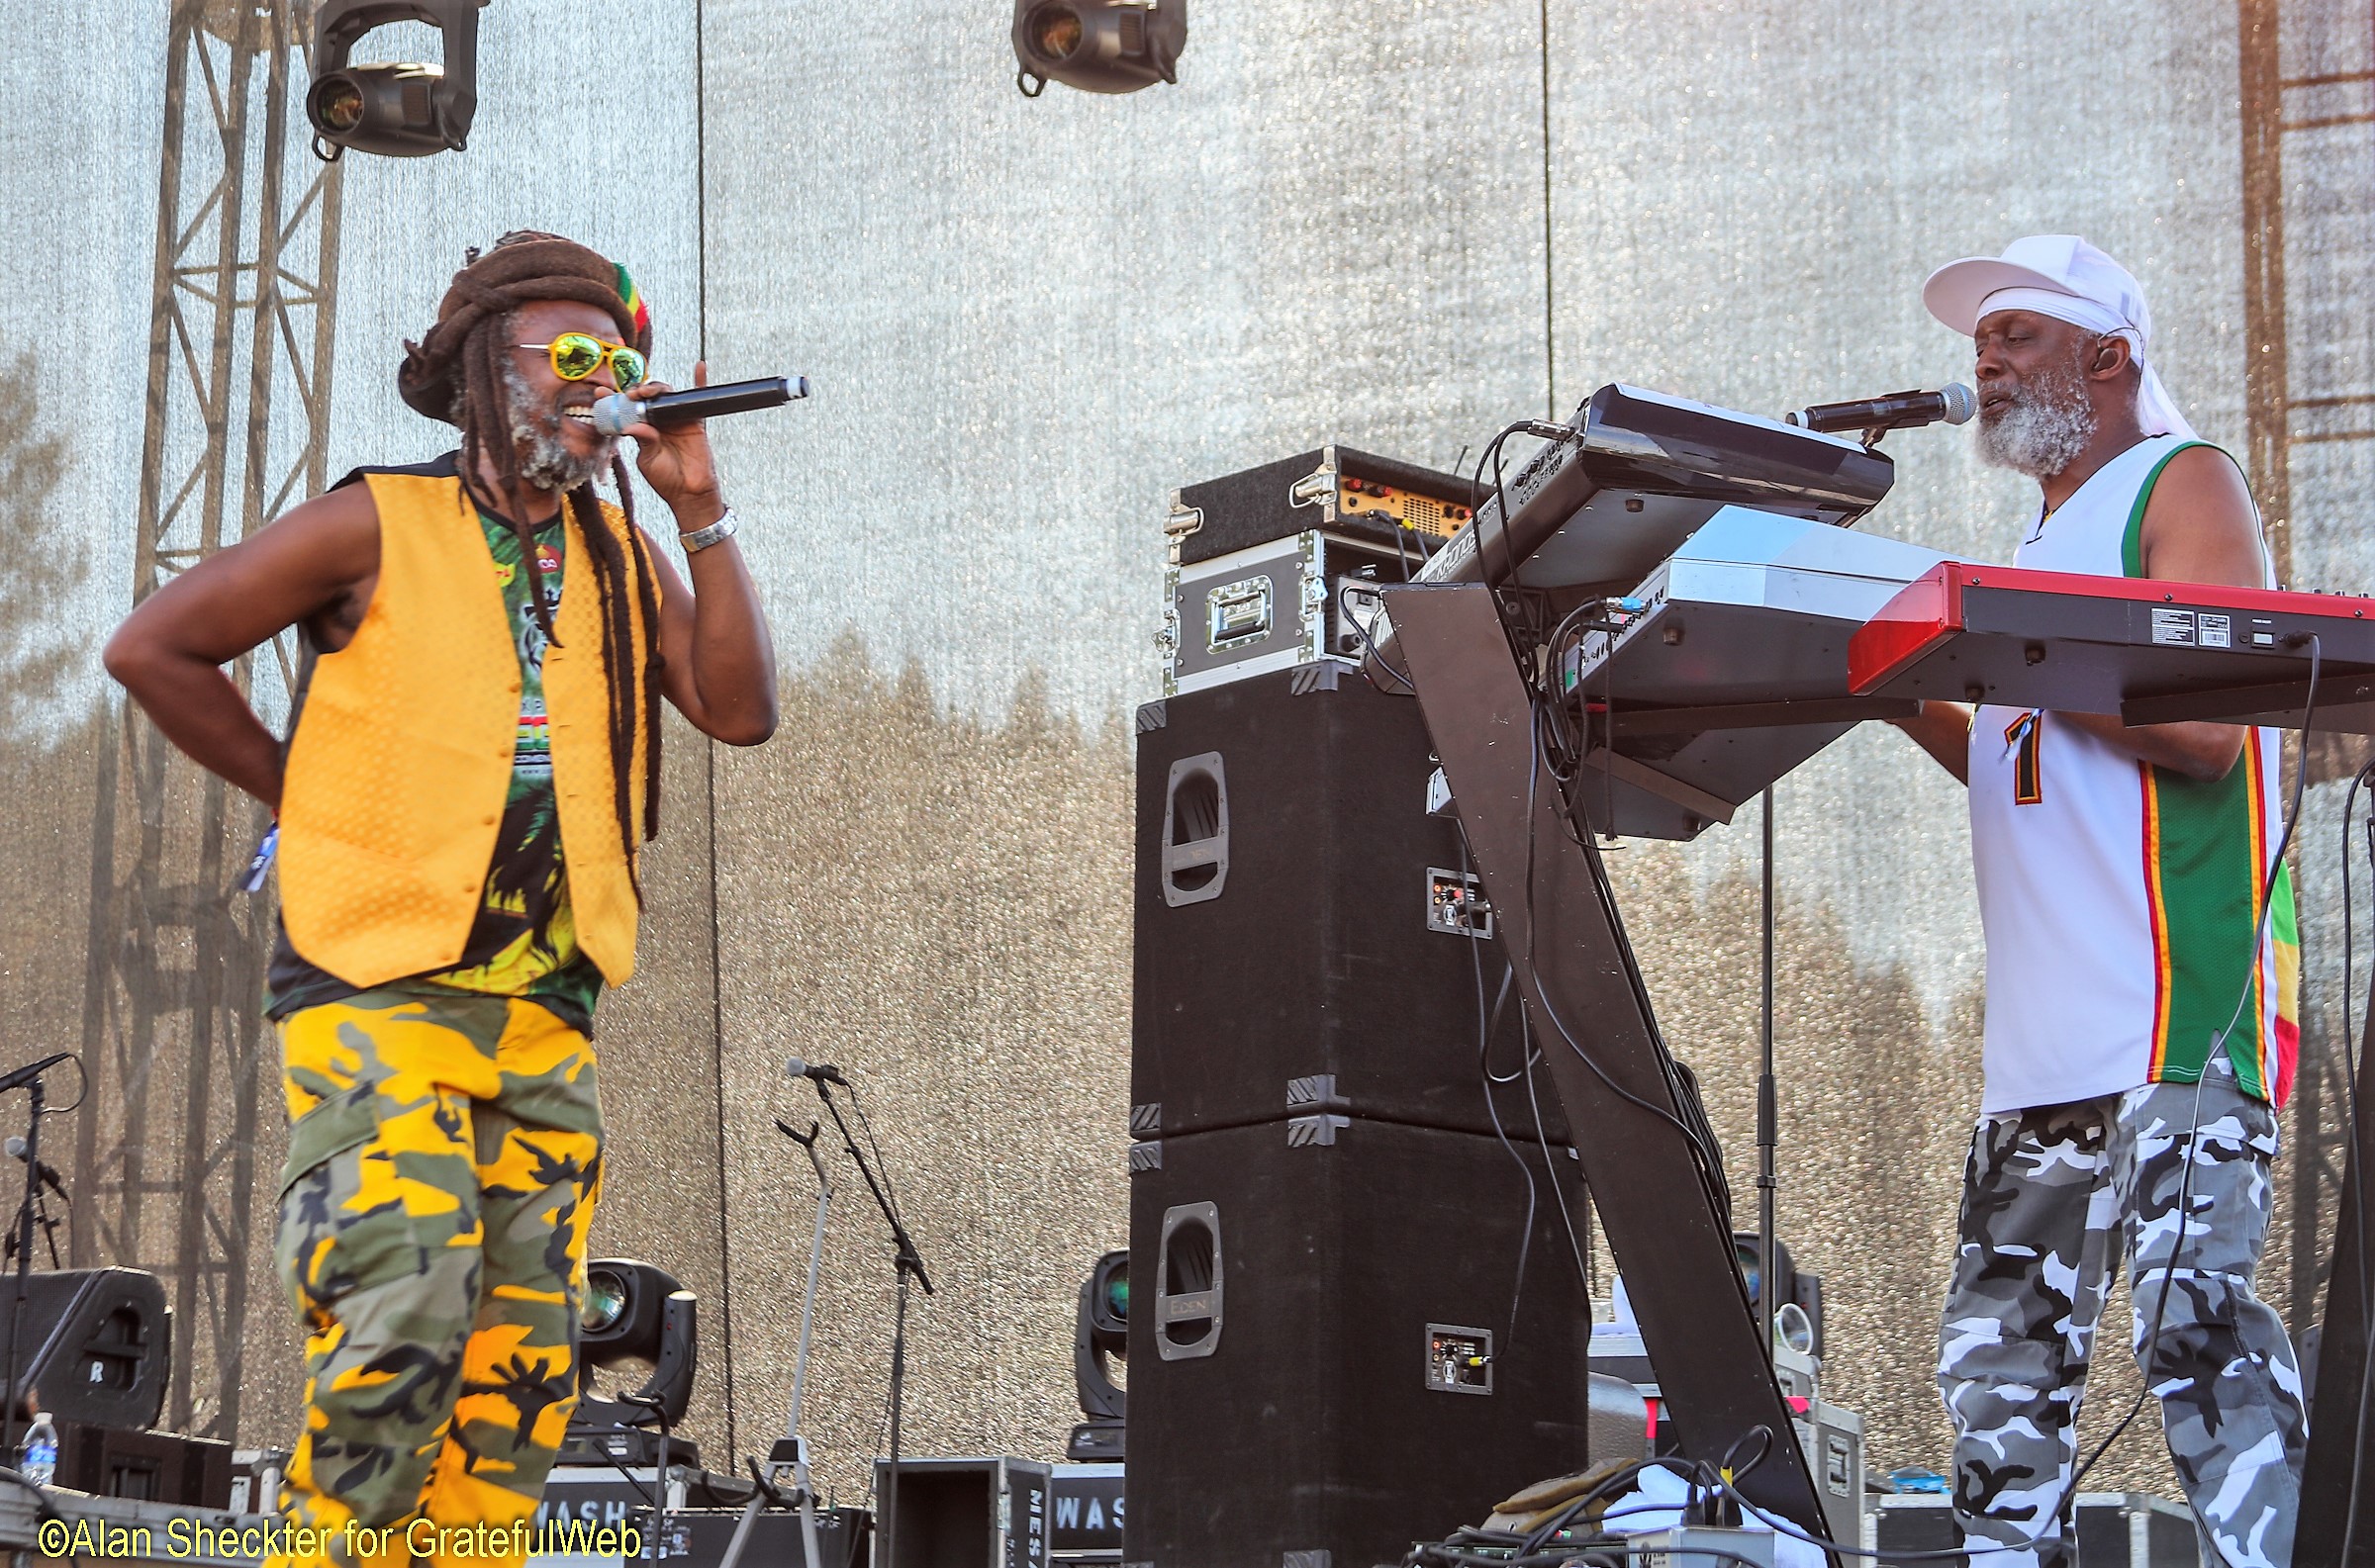 Steel Pulse’s David Hinds (left) and Selwyn Brown